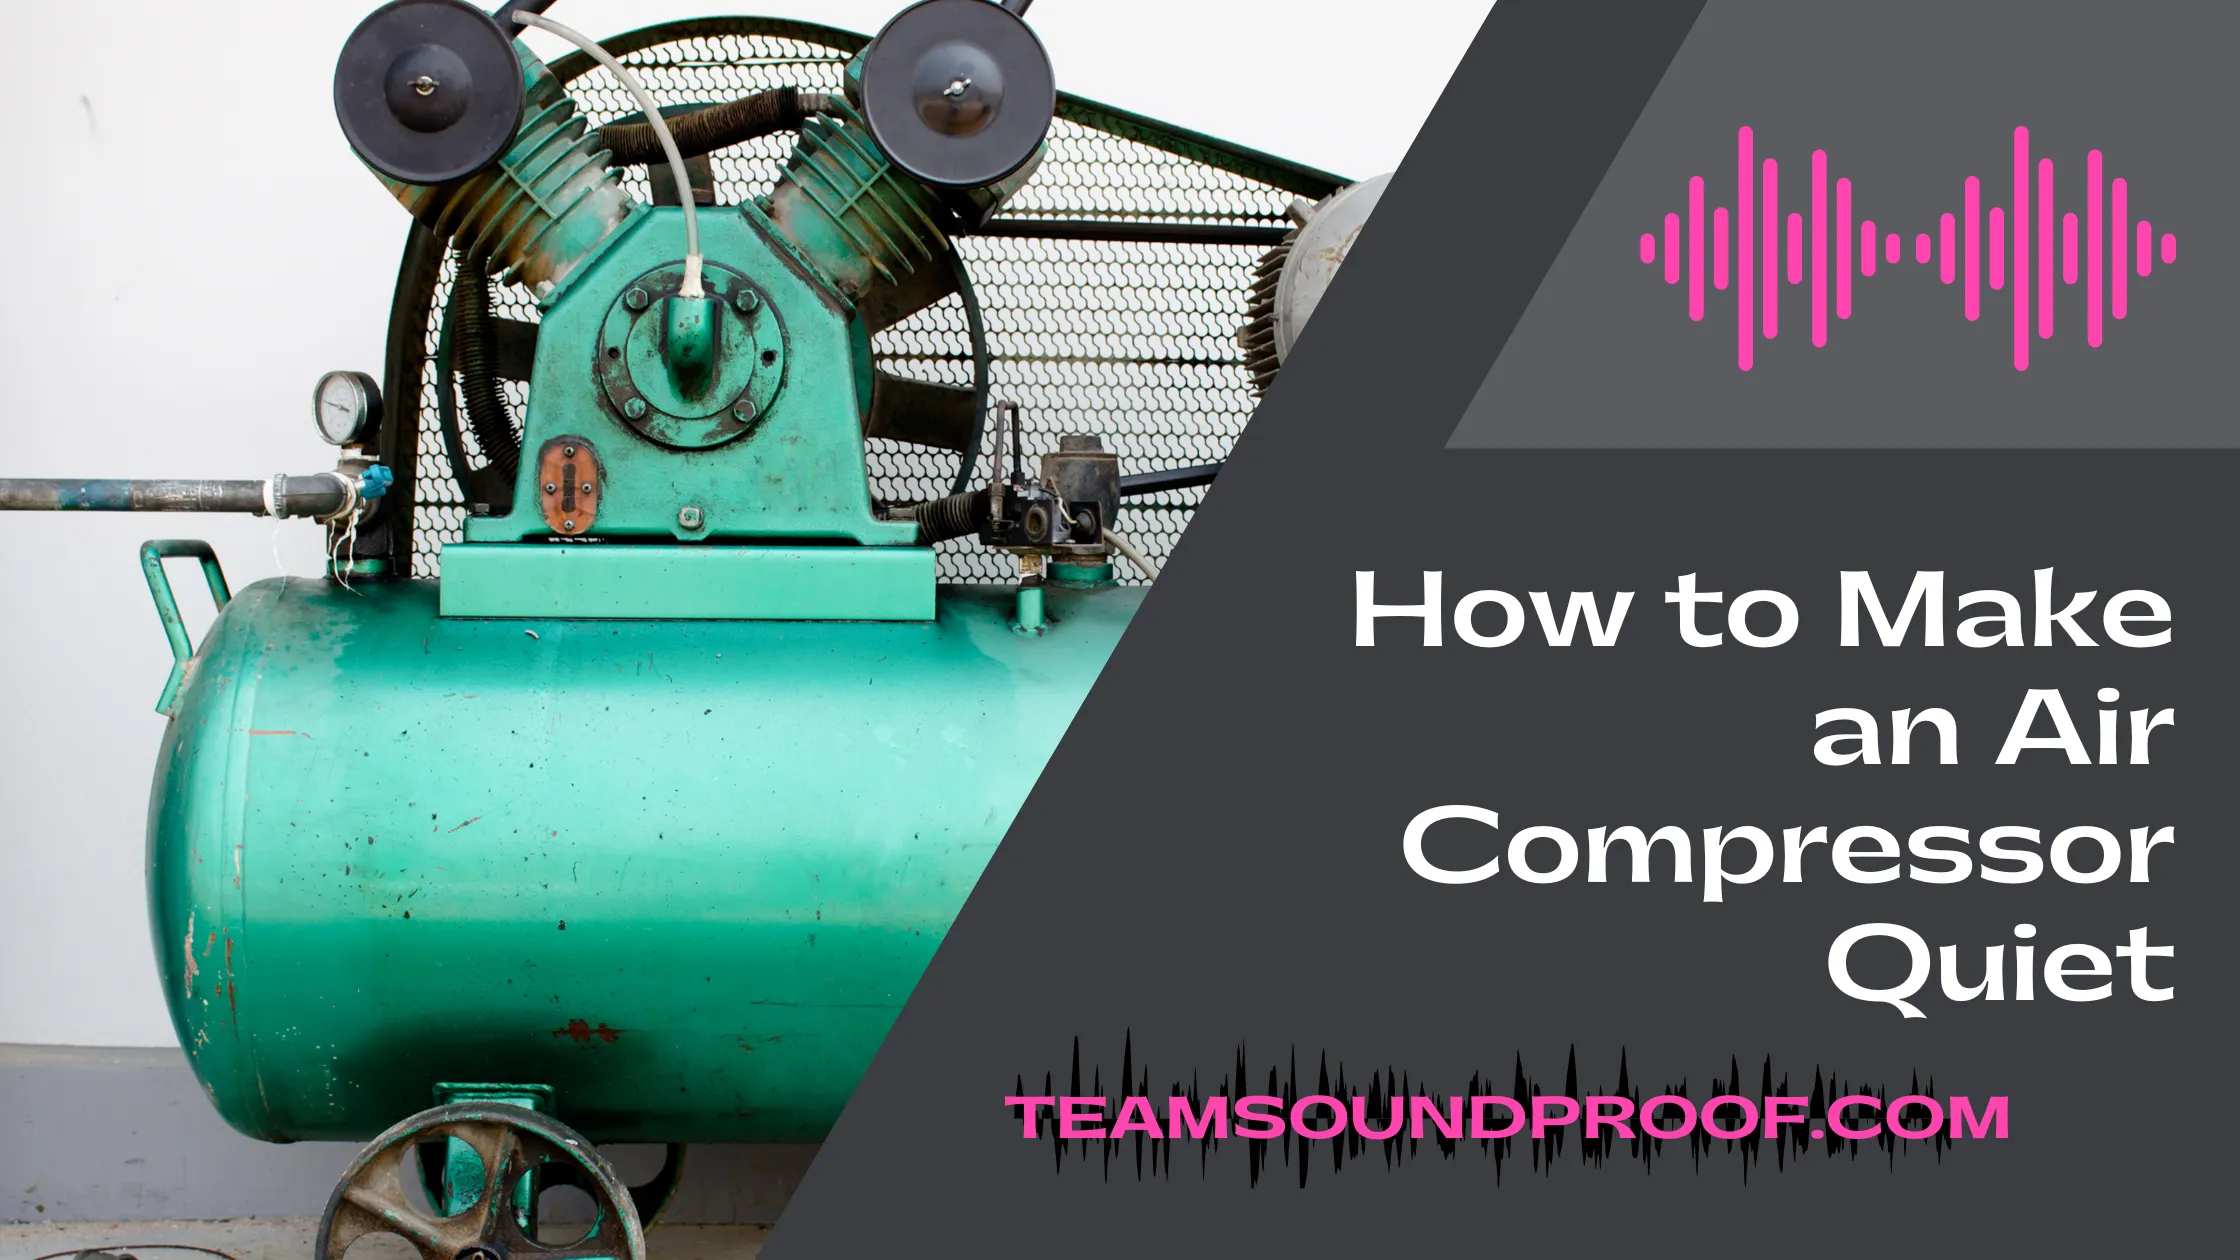 How to Make an Air Compressor Quiet? Complete Guide